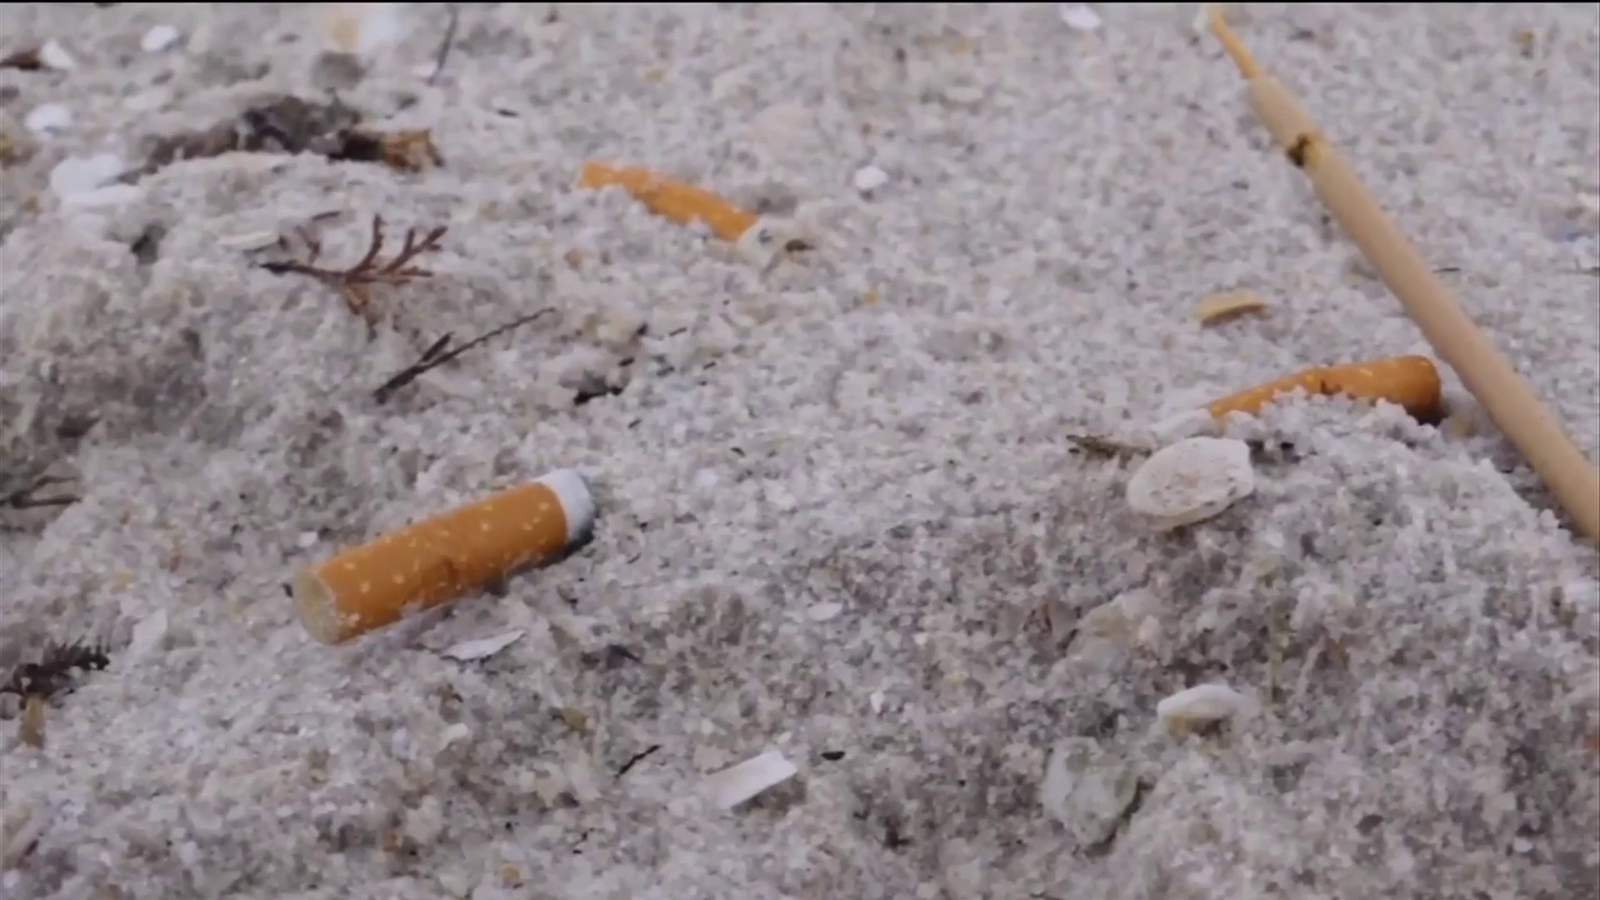 Smoking at public beaches, parks could be banned under newly filed bill